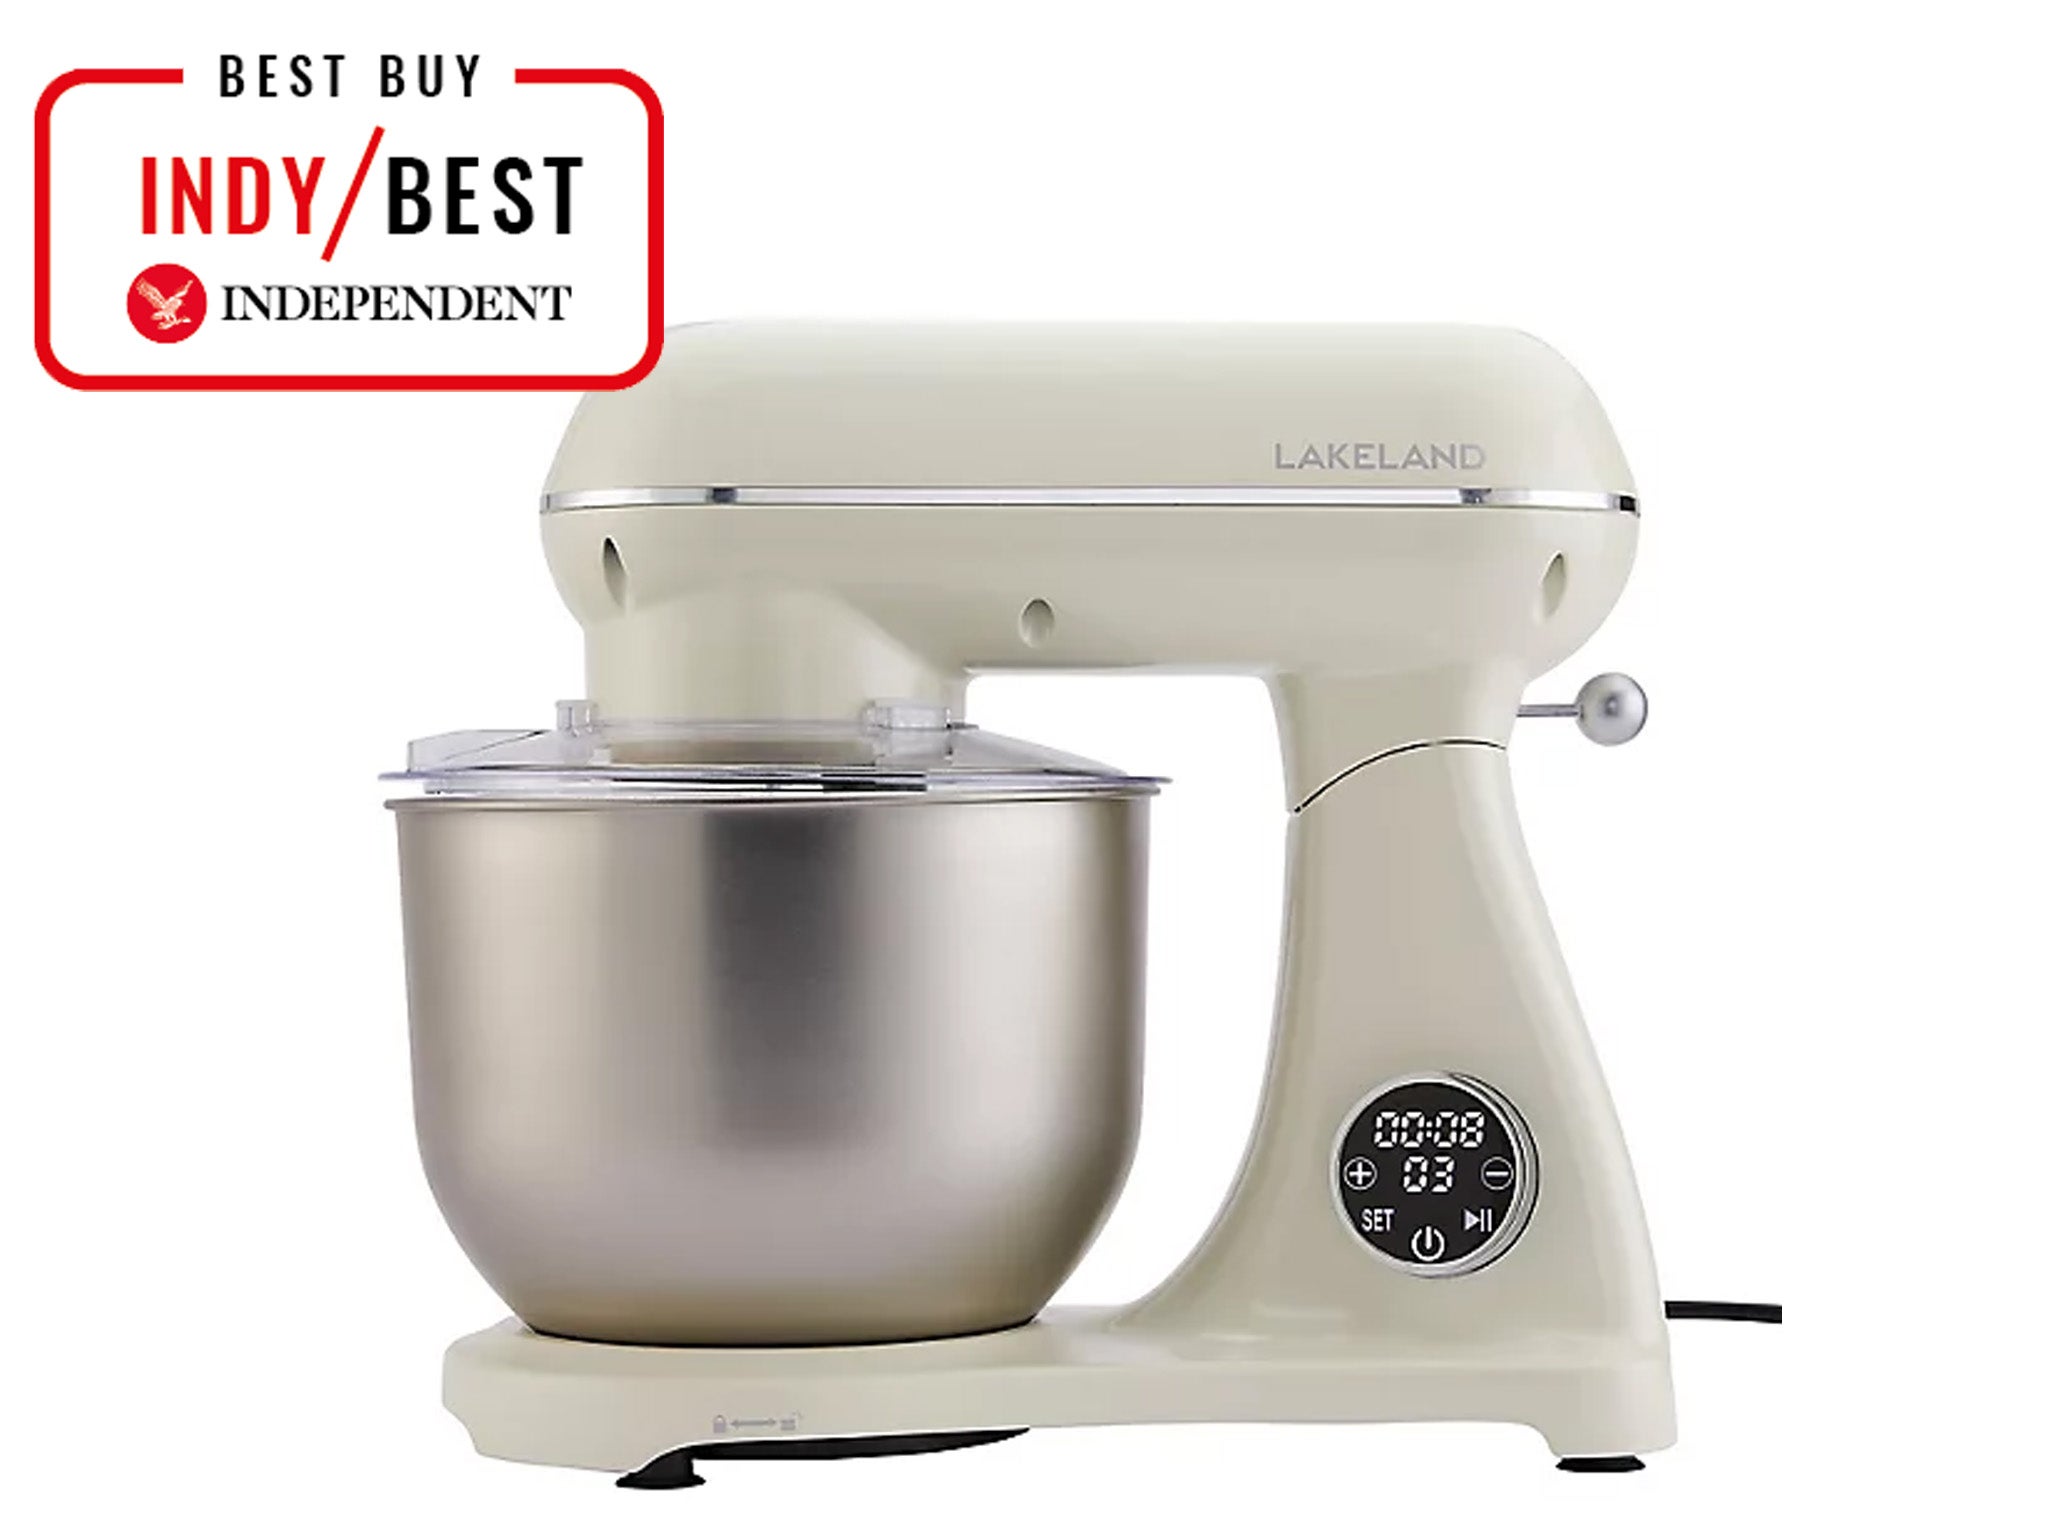  Kitchen Electric Food Mixer 1300W 6.5L Electric Mixer Cream Whipping  Machine For Home Baking (Color : Silver, Size : 6.5L): Home & Kitchen